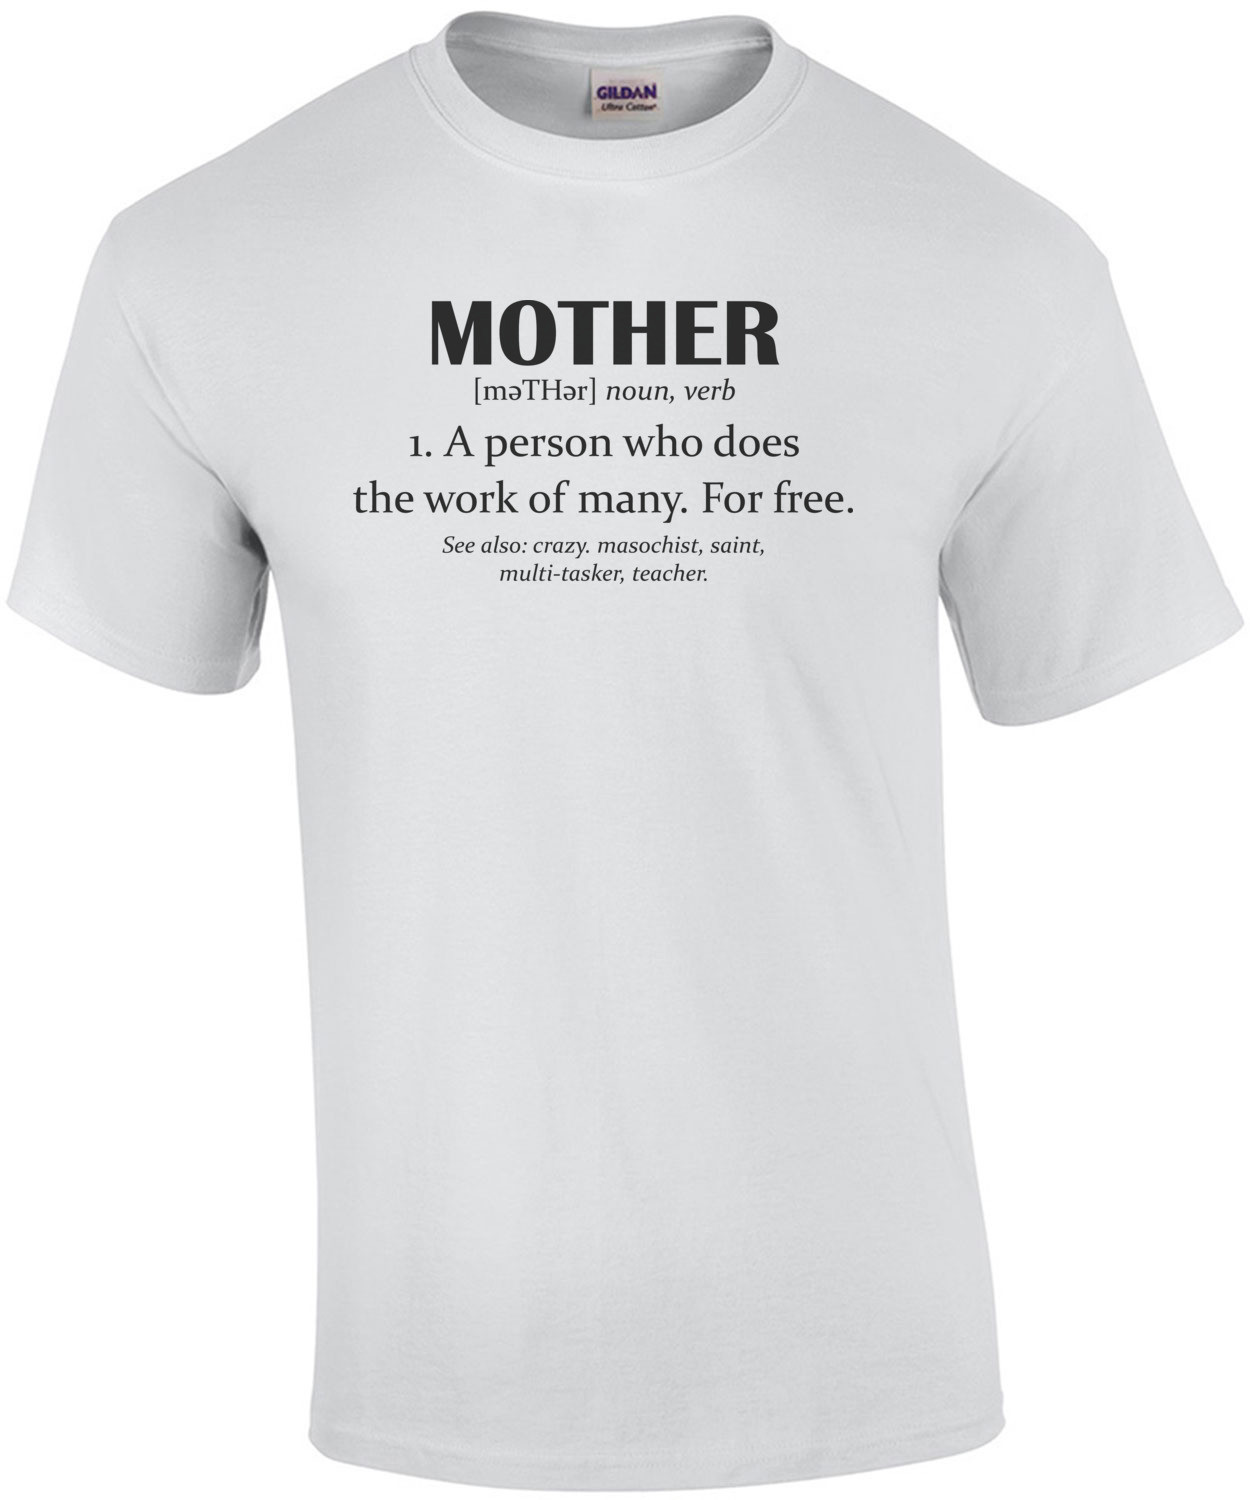 Mother Defined - Mother A person who does the work of many. For Free - Mother T-Shirt